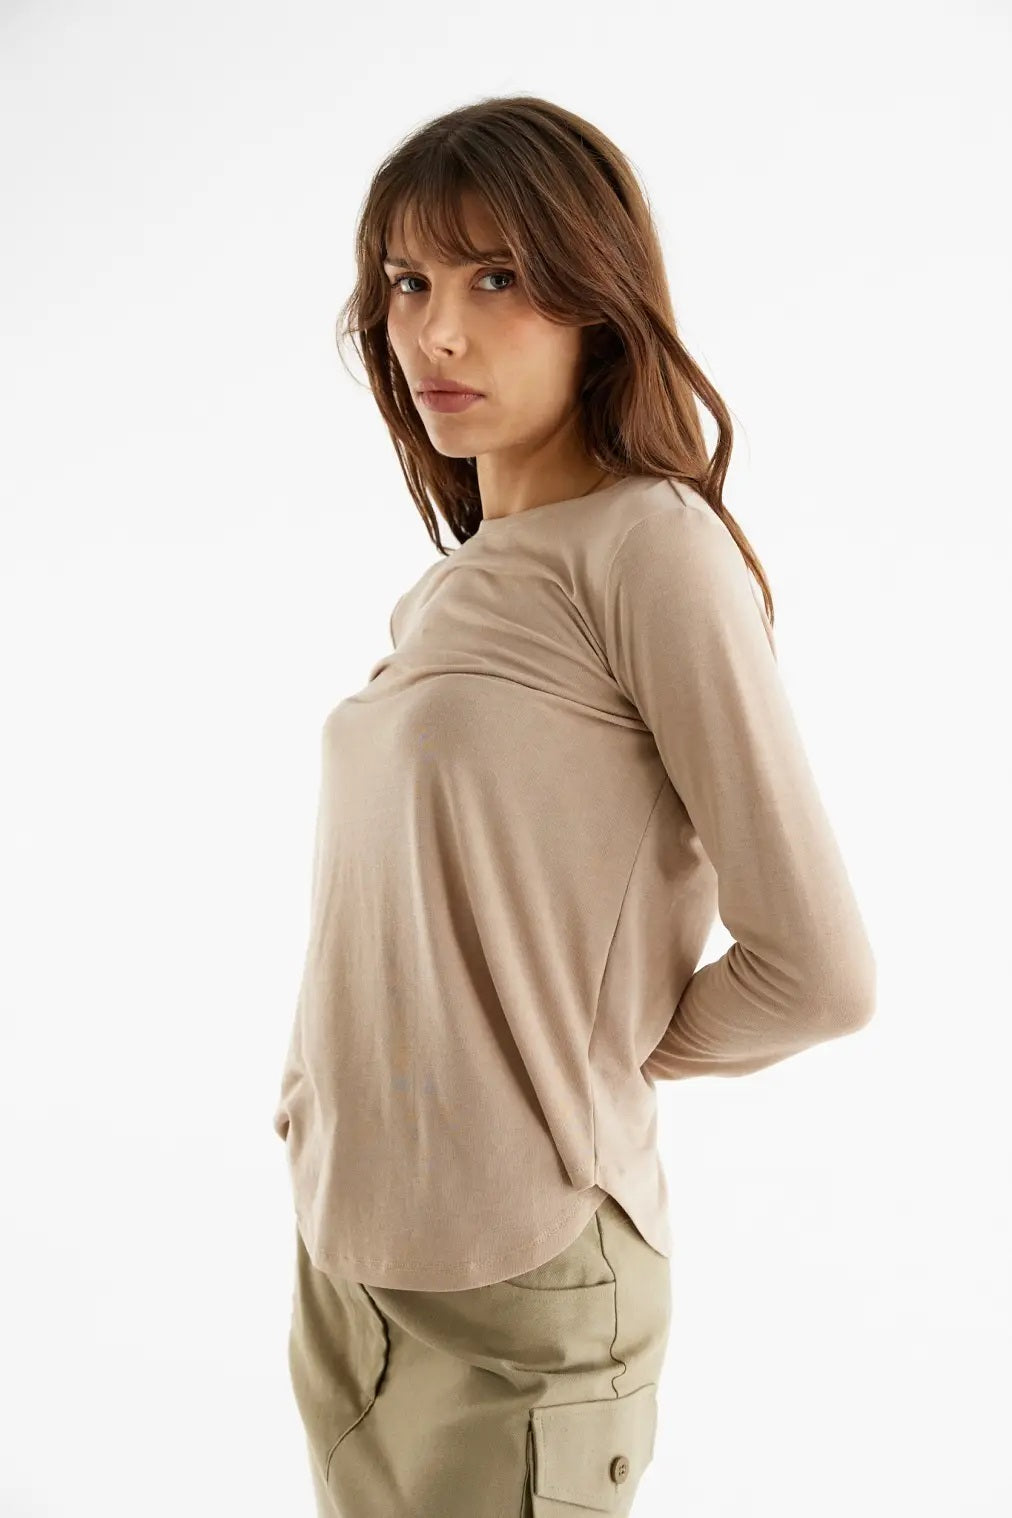 All : Row, The Tami Long Sleeve Top in Beige - Boutique Dandelion